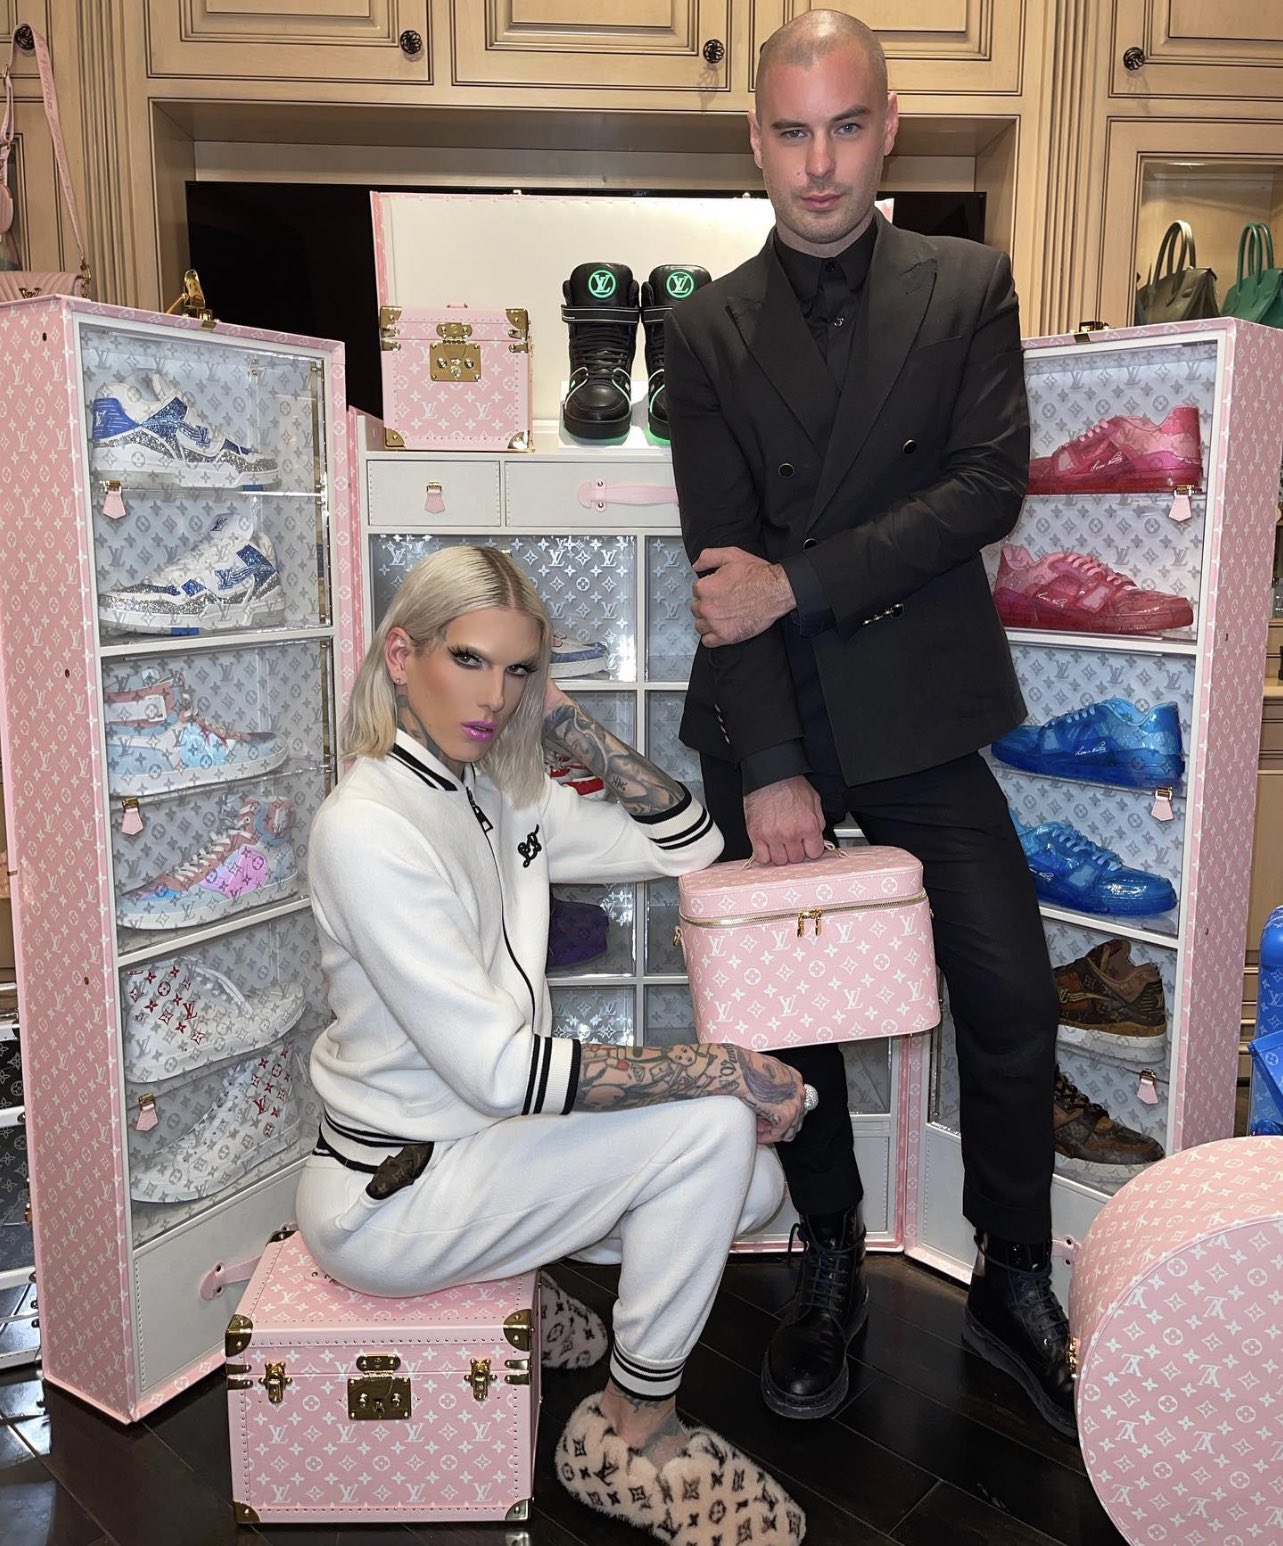 jeffree star bag collection worth